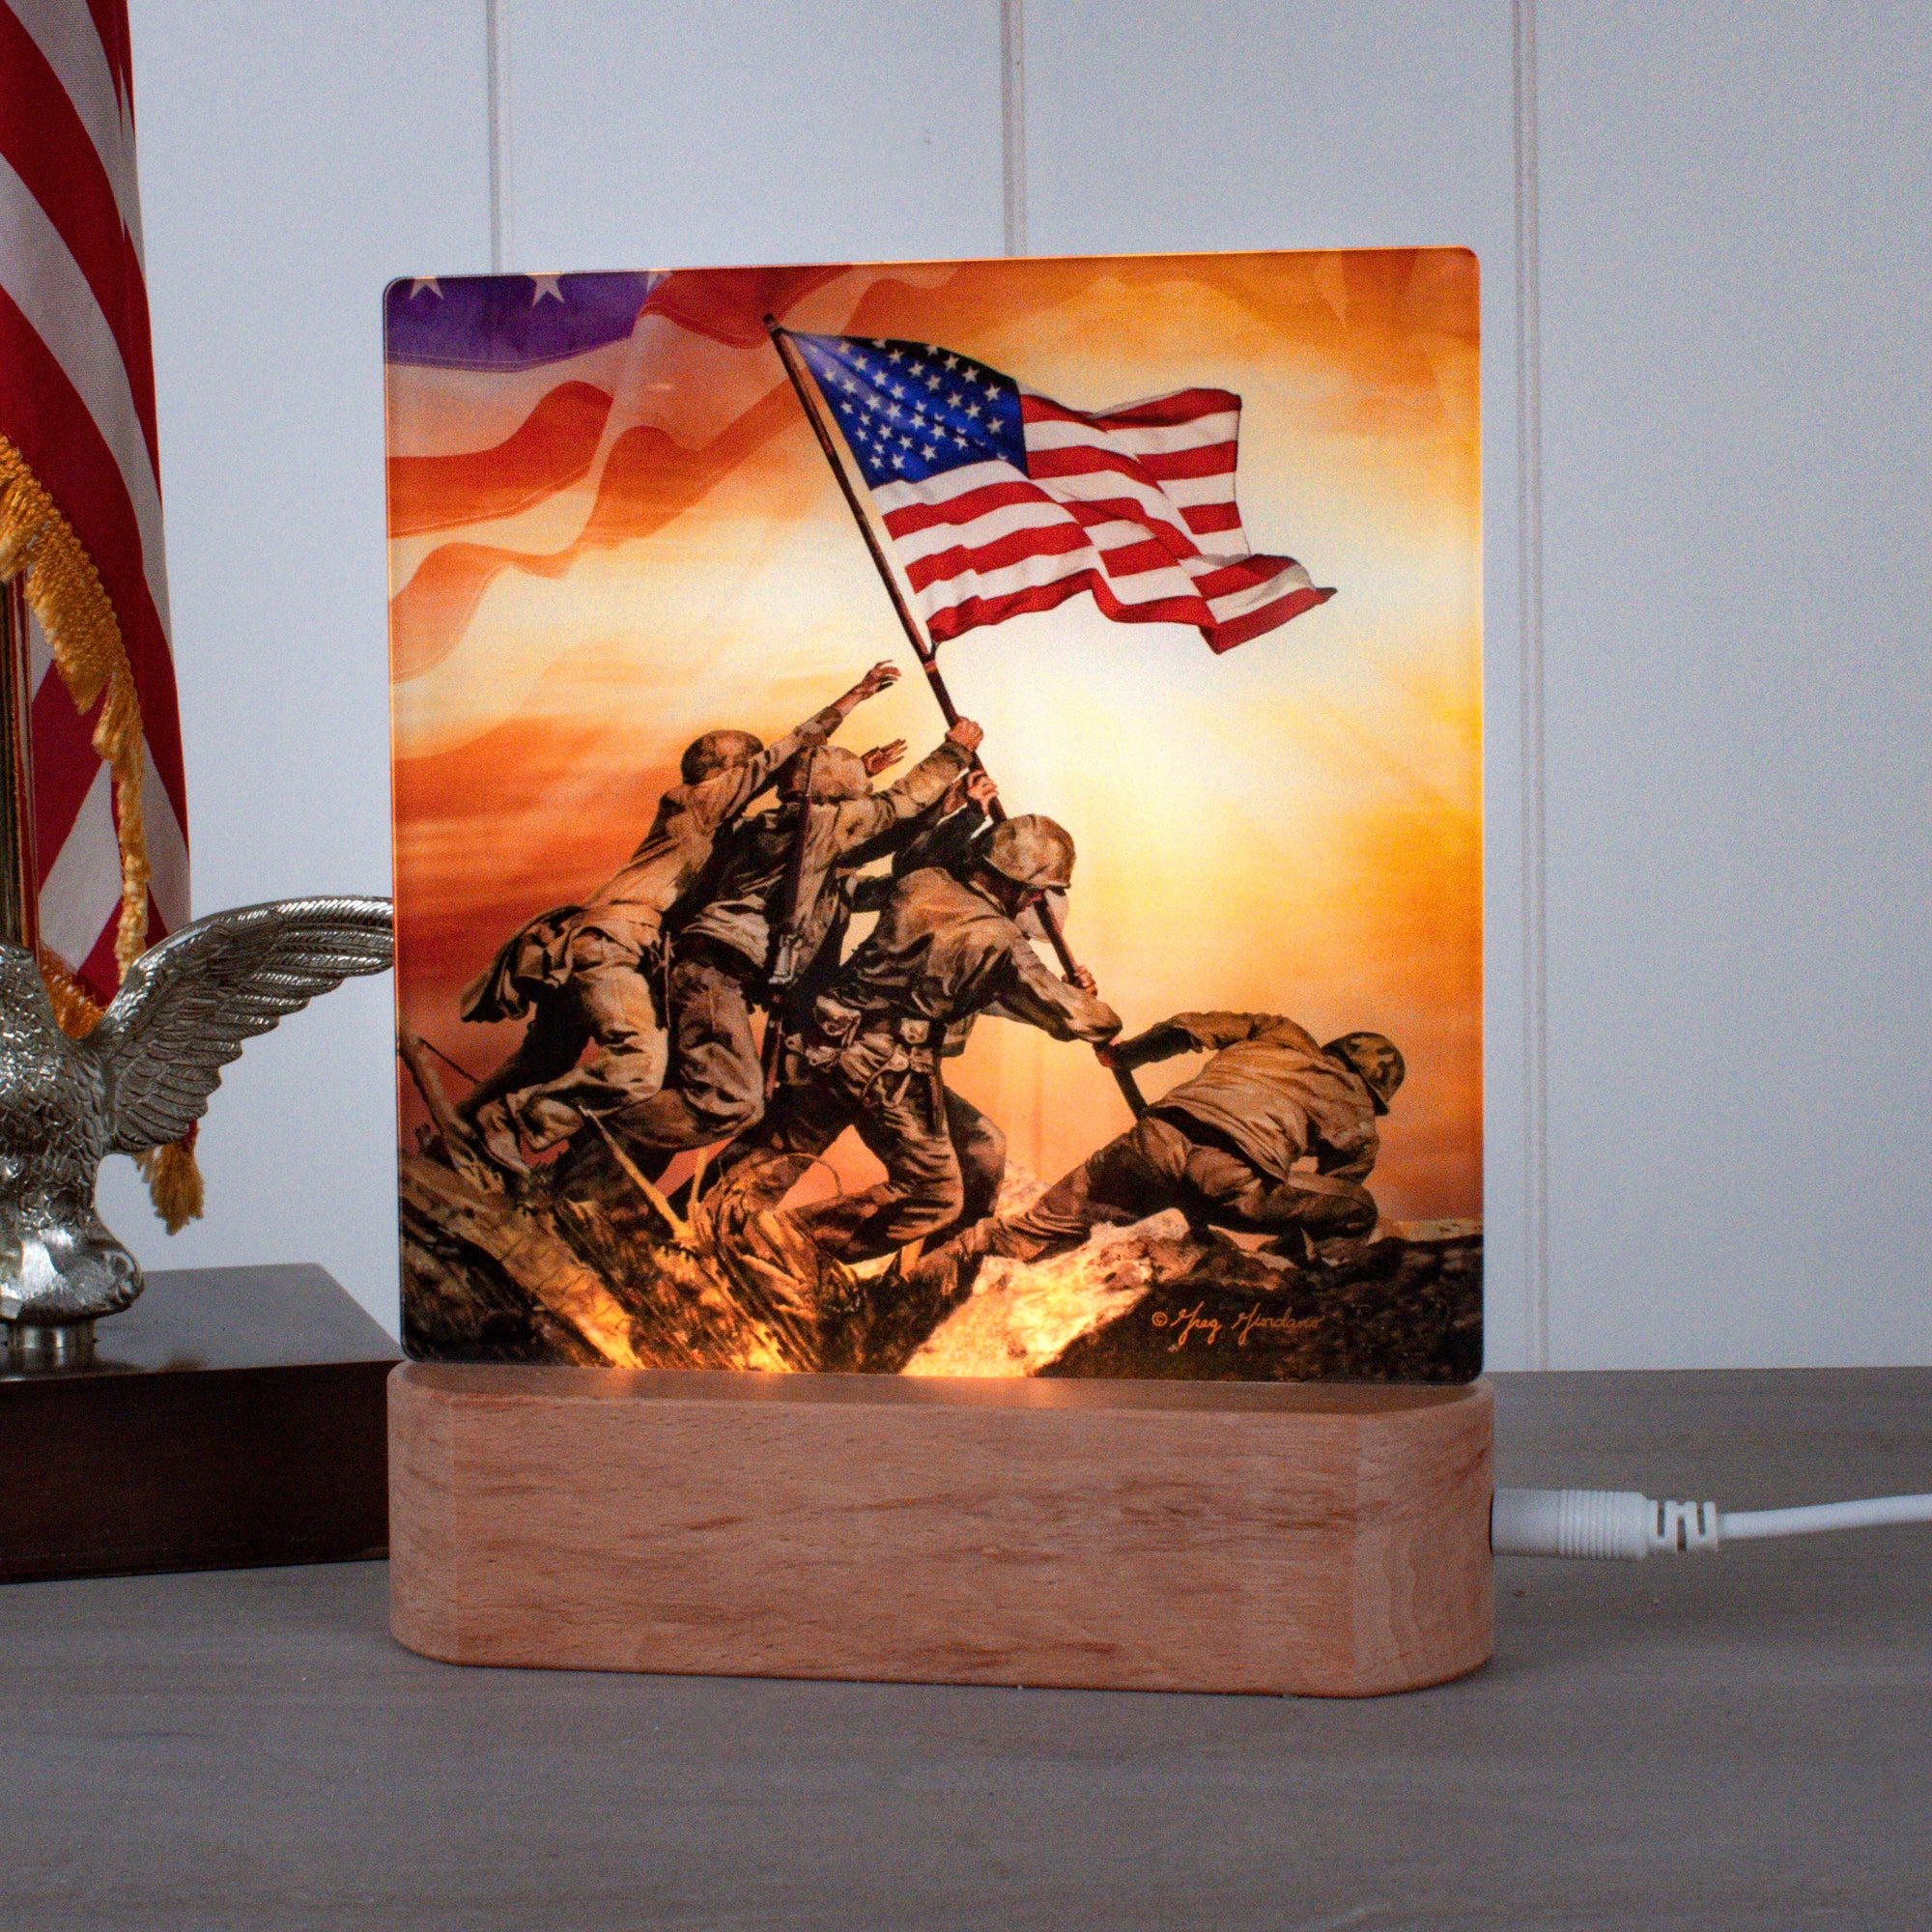 Home of the Brave LED Nightlight